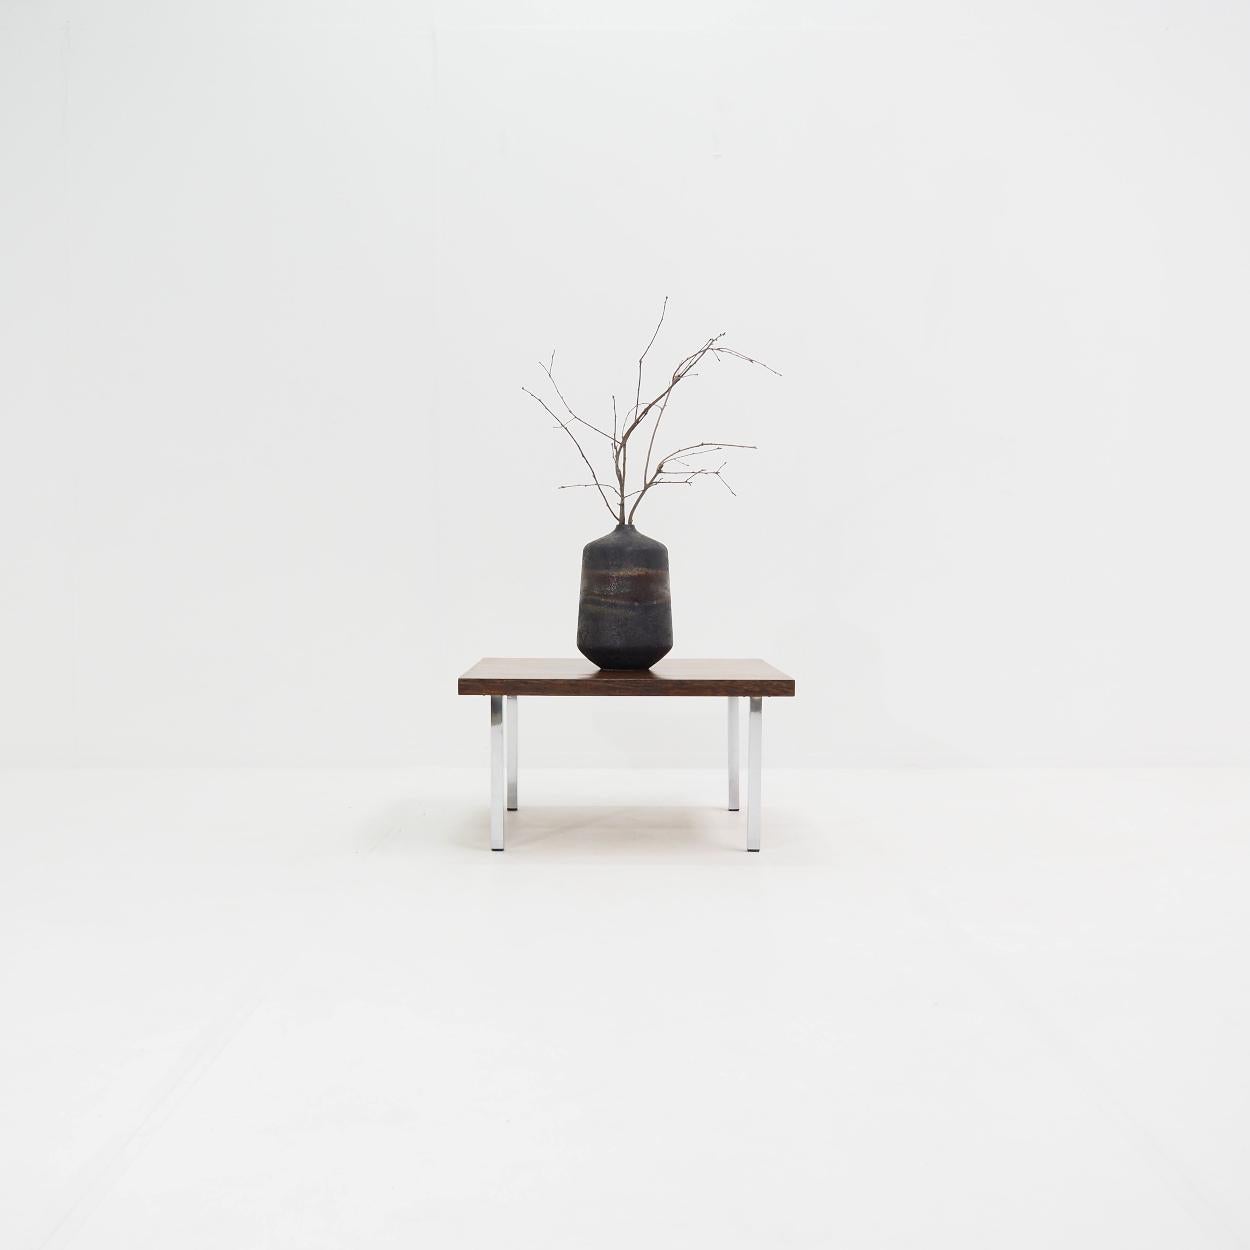 Coffee table with strong straight lines designed in the 1960s by Kho Liang Ie for the Dutch manufacturer Artifort.

The table has a square top that is made of wood veneer. It has a beautiful dark colour with an absolute minimum of wear.

Many of Kho